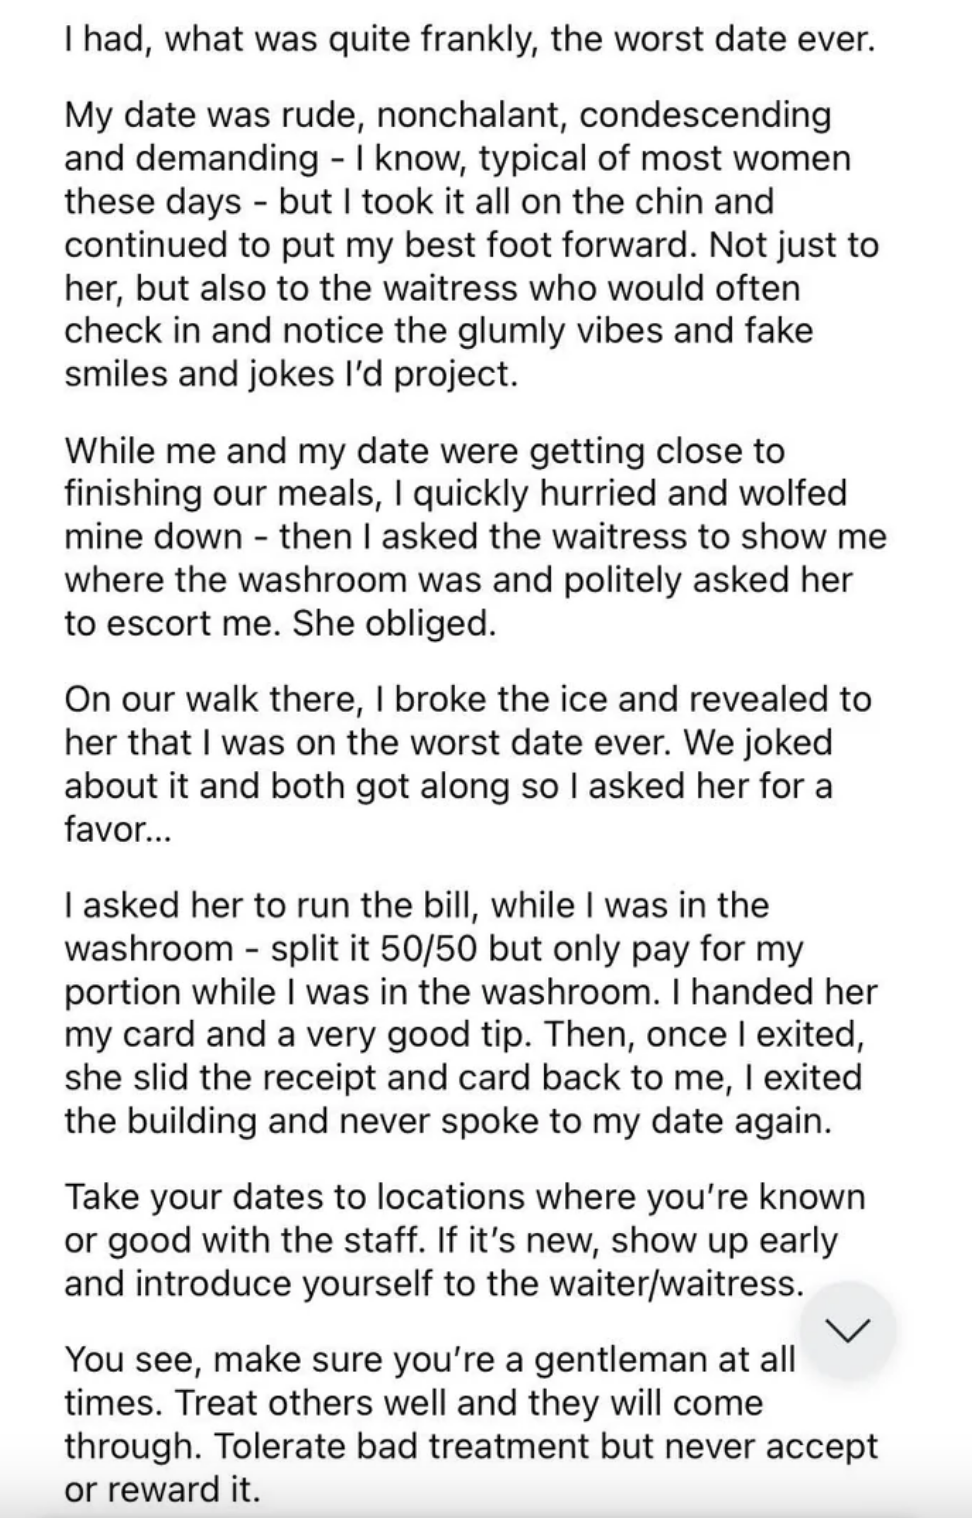 &quot;I exited the building and never spoke to my date again.&quot;